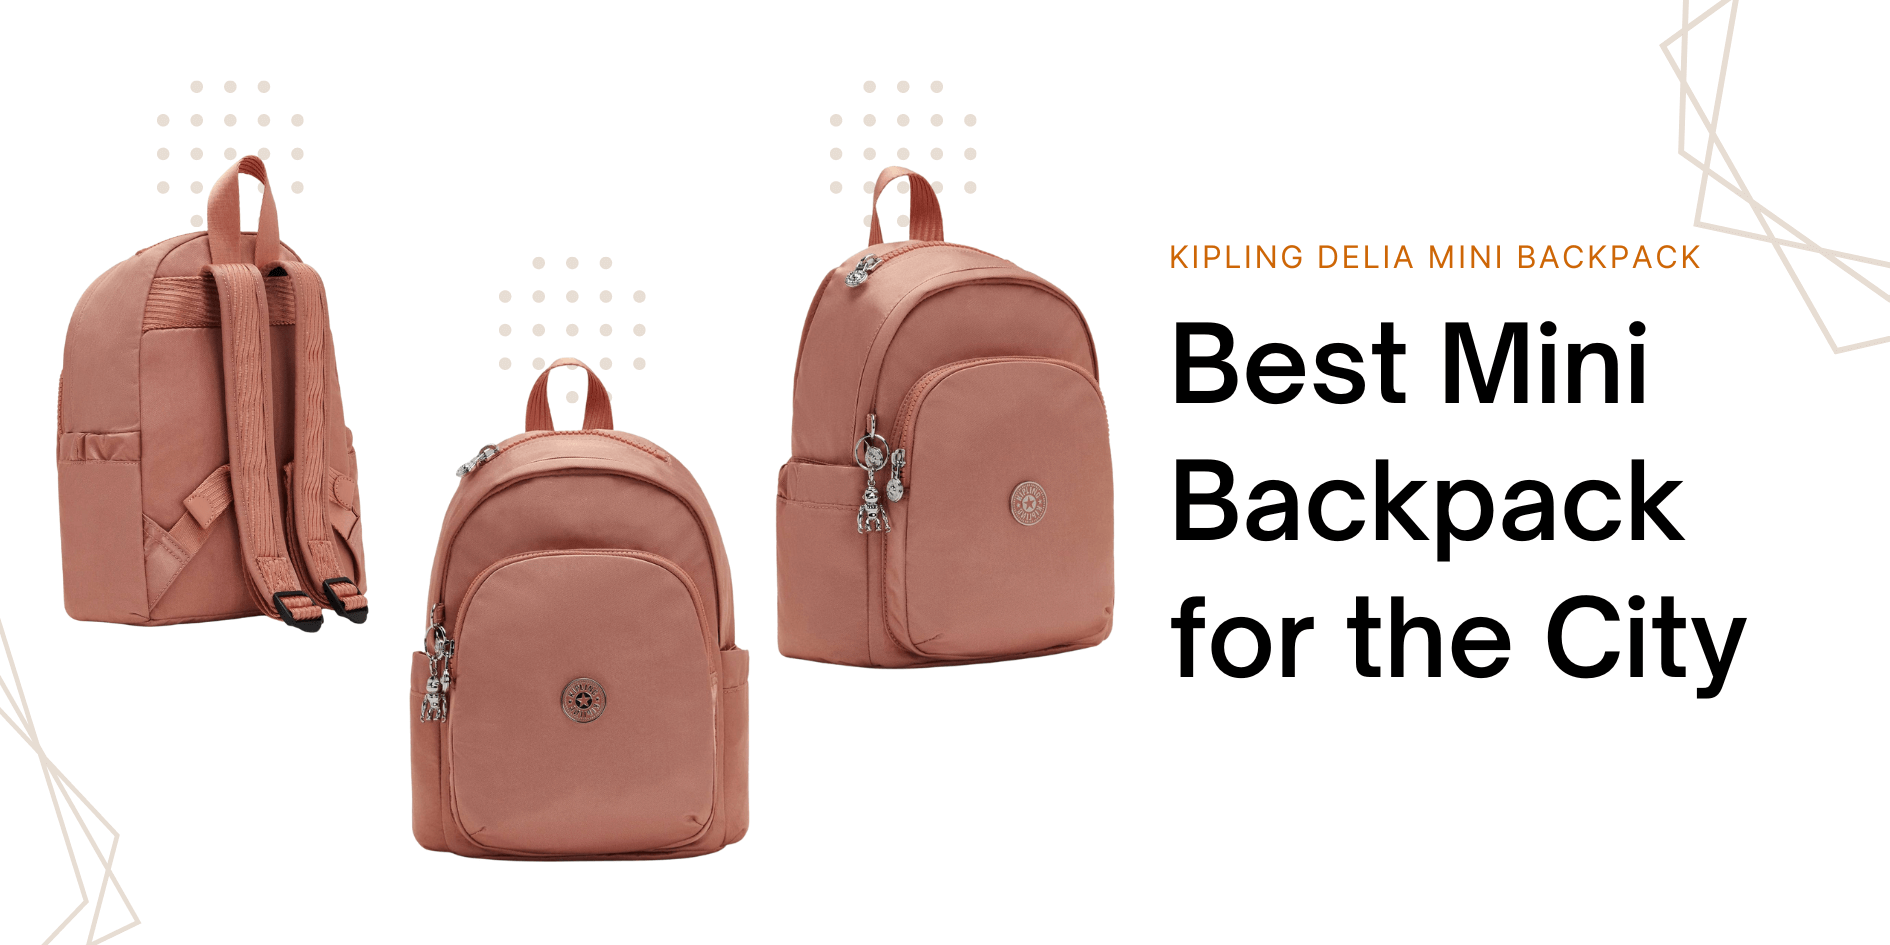 Best Mini Backpack for the City